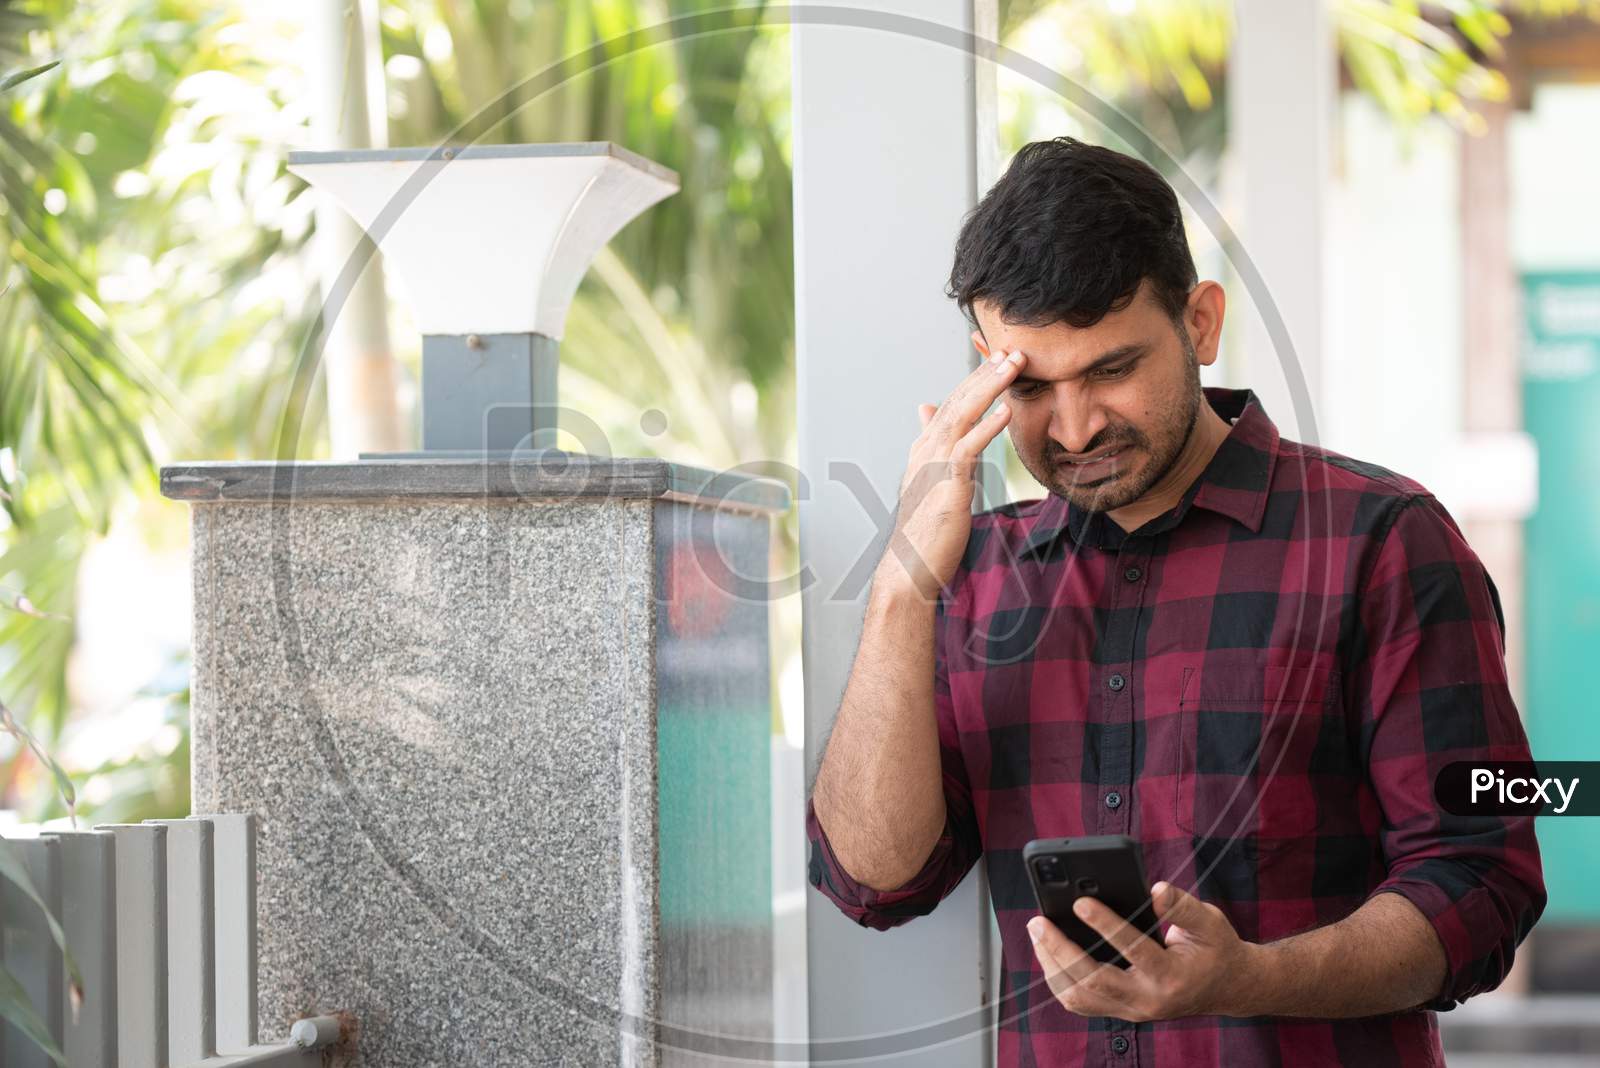 Portrait of a Young Indian Man makes gestures while talking on a video call.